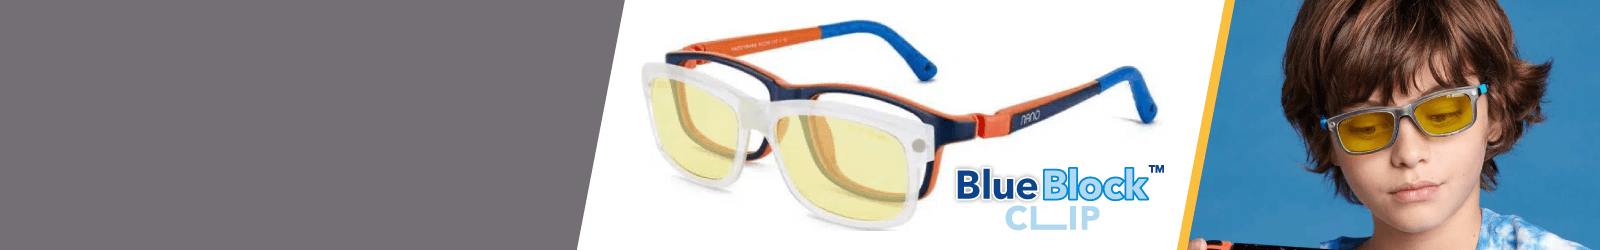 Nano Blue Block Clip Eyewear for Kids from 4 to 6-year-old